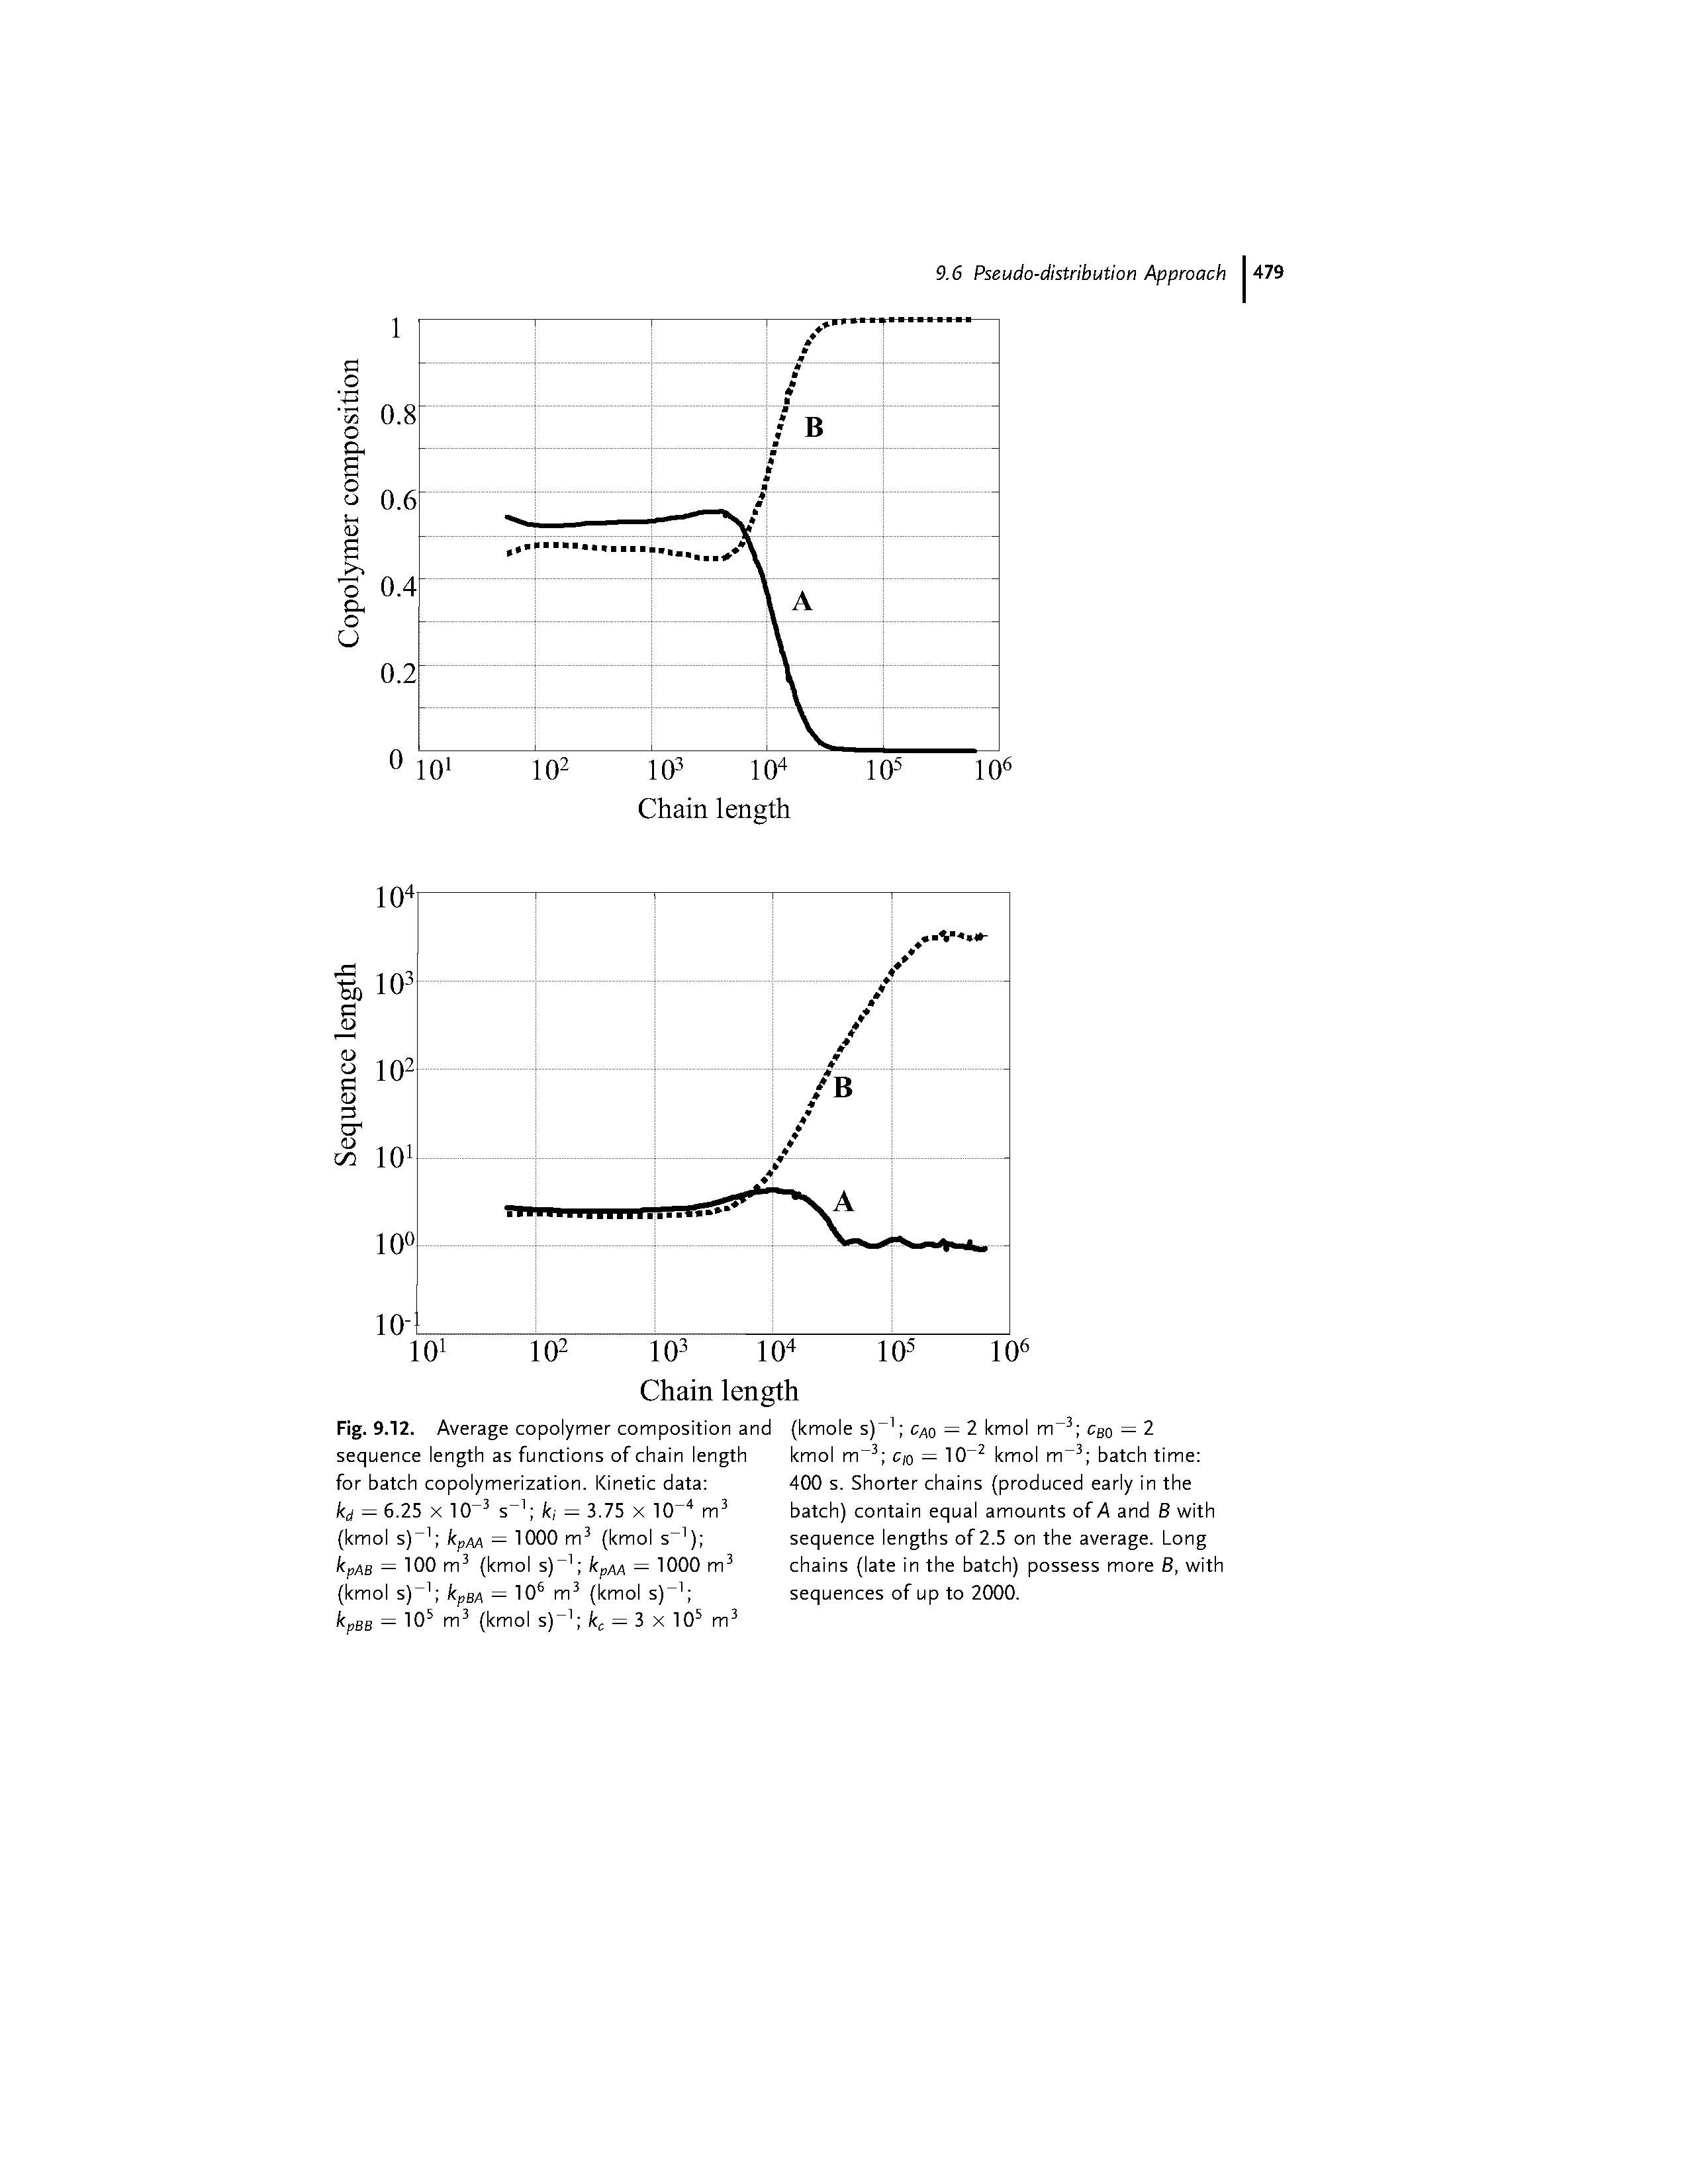 Fig. 9.12. Average copolymer composition and sequence length as functions of chain length for batch copolymerization. Kinetic data kd - 6.25 X 10 s ki - 3.75 x 10 m (kmol s) kpM — 1000 m (kmol s ) hpAB — 100 m (kmol s)...